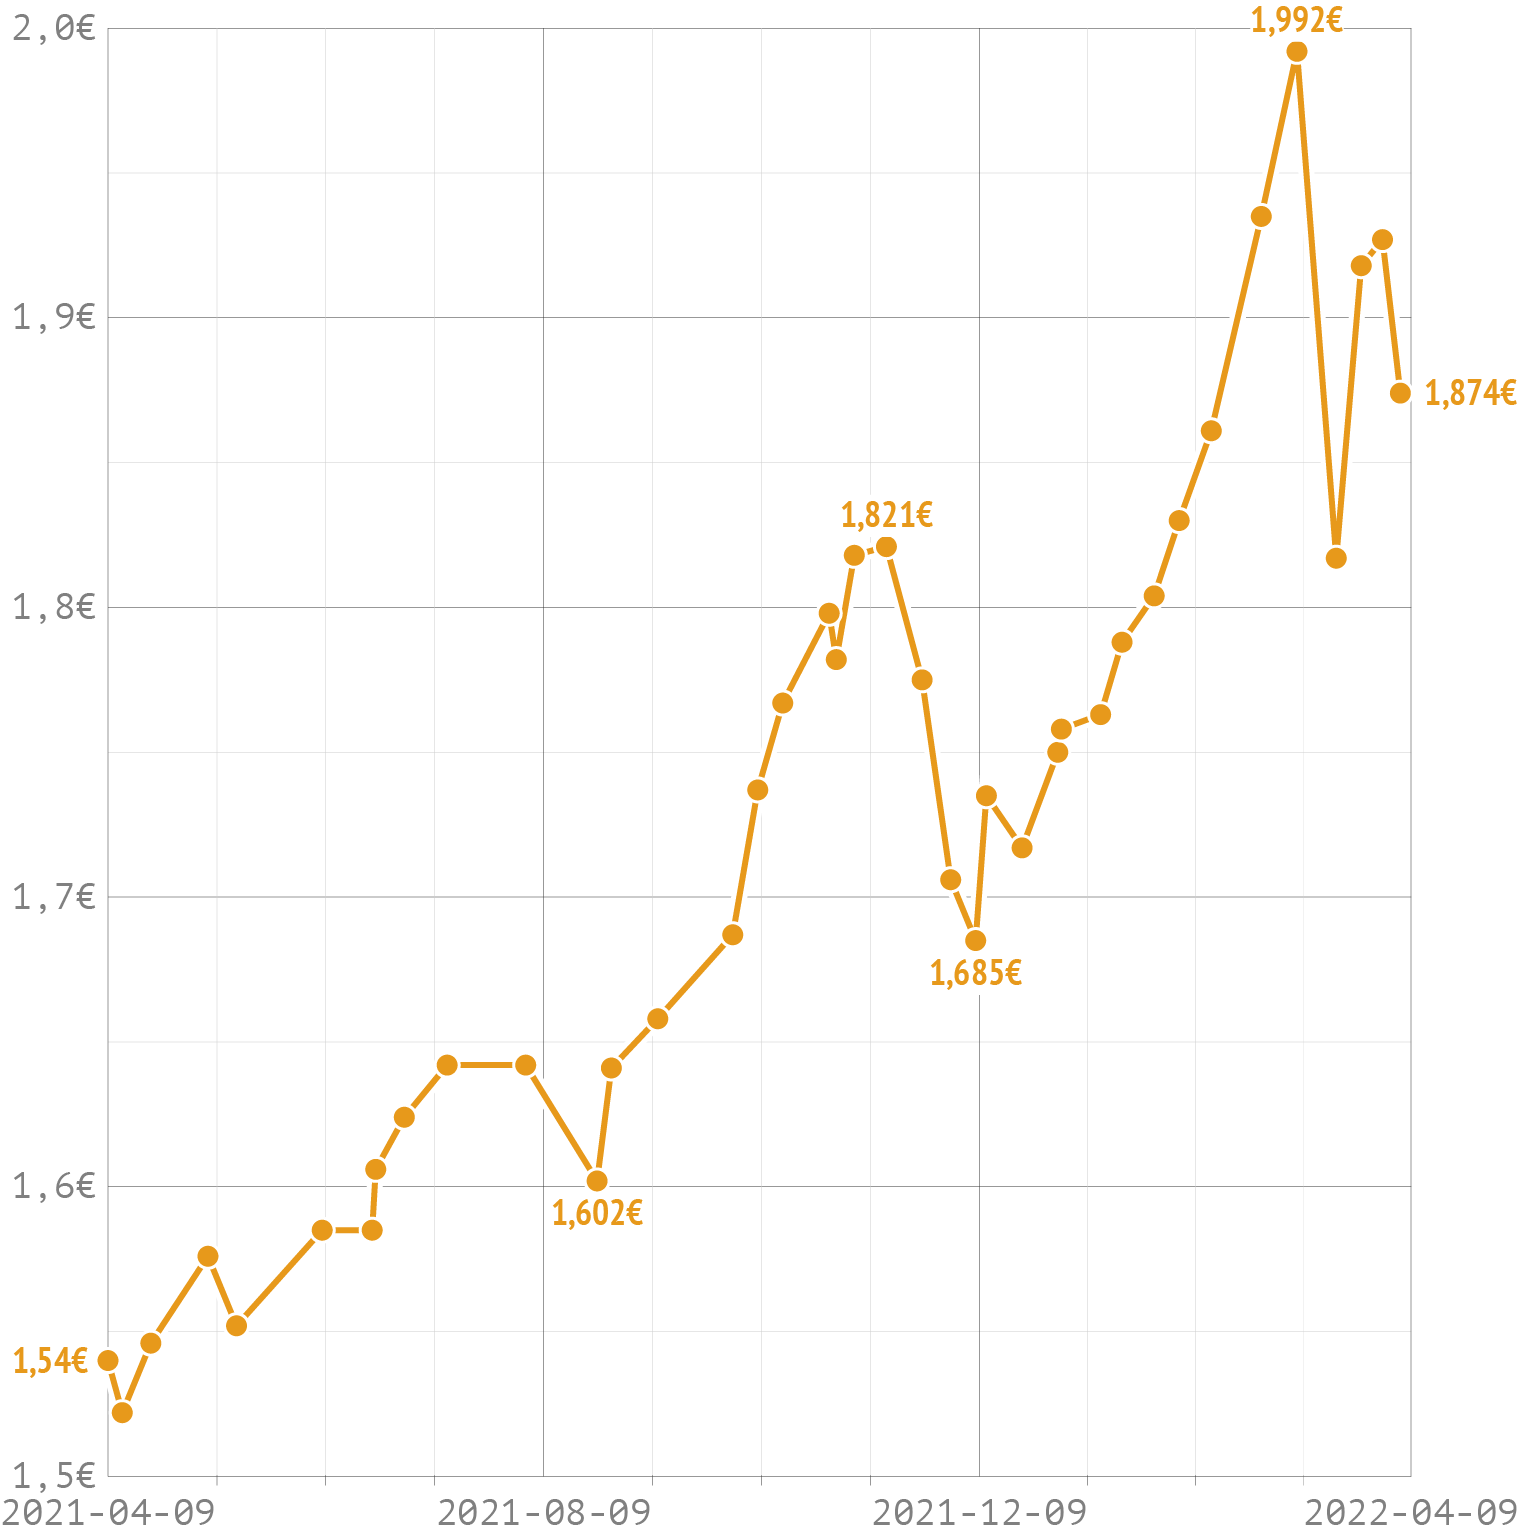 A line chart with linear line interpolation showing the maximum price of gasoline over the course of 1 year